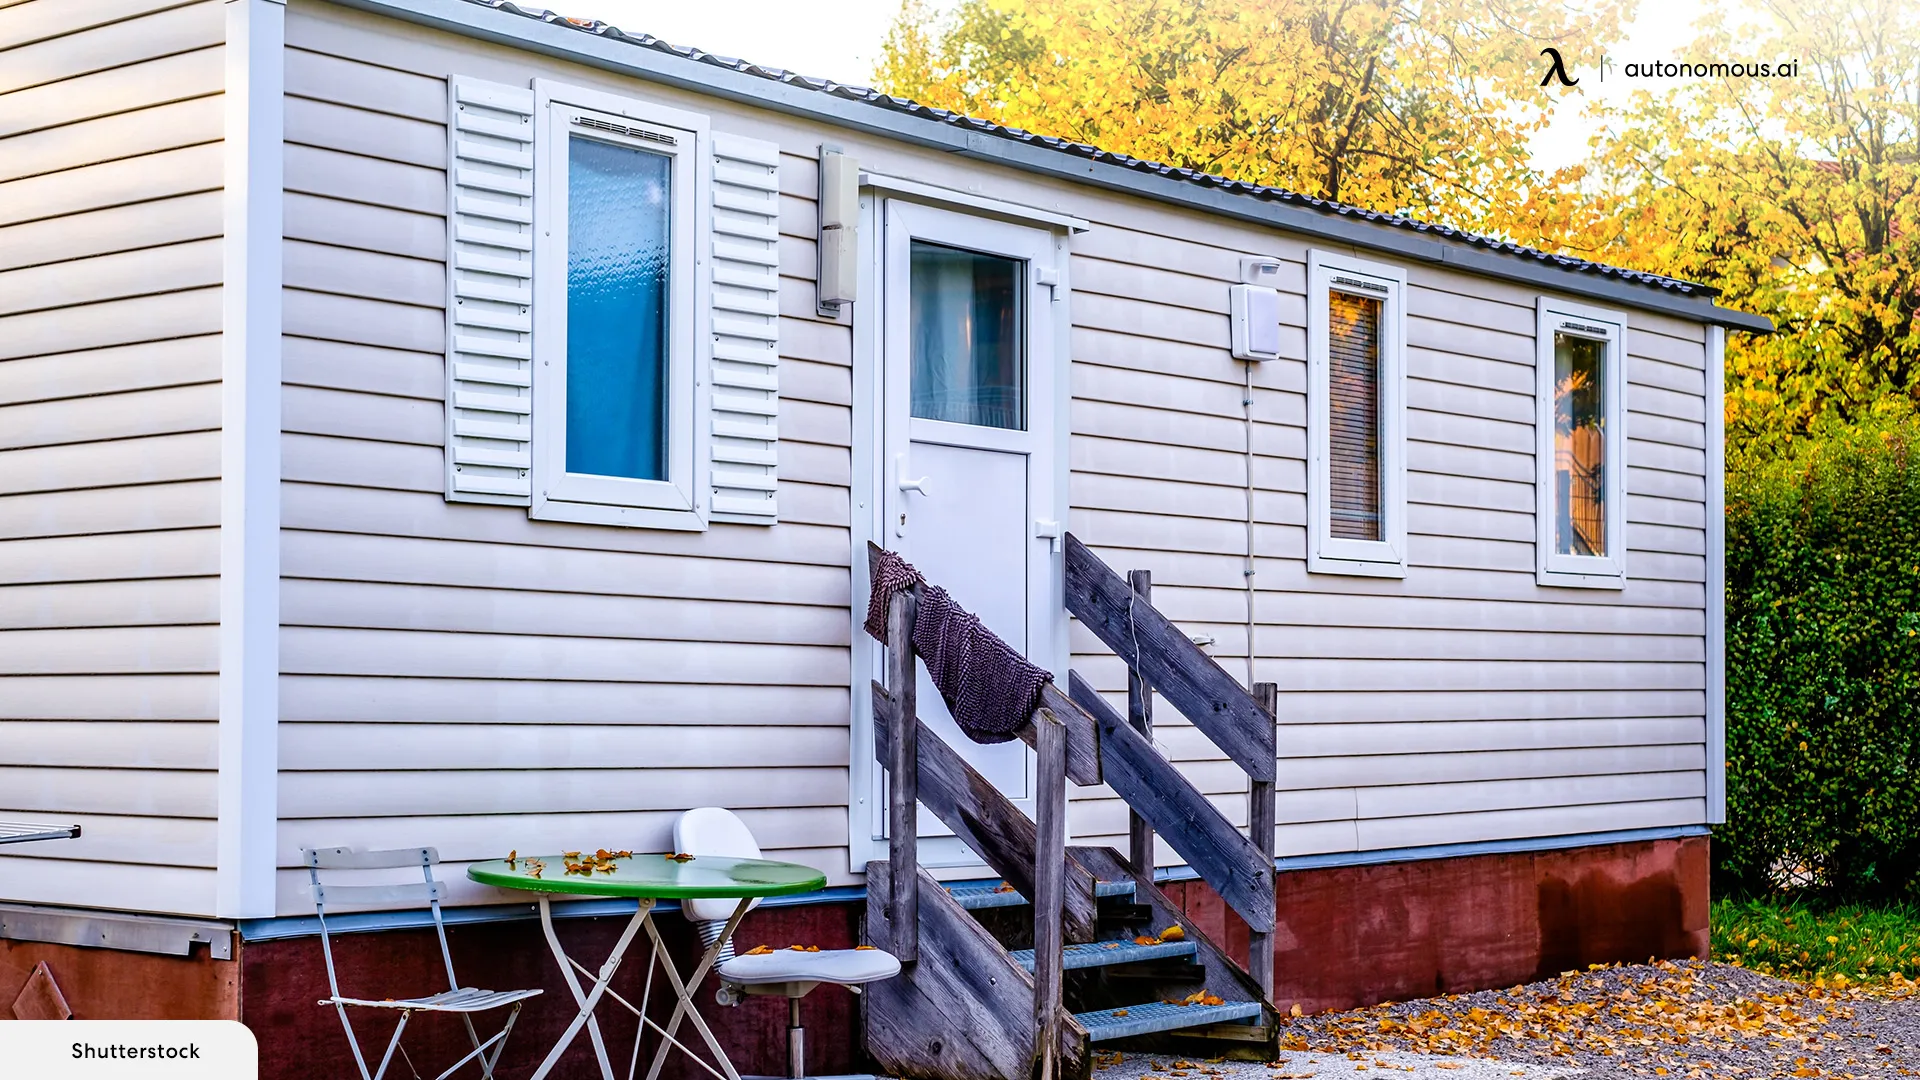 The Cost of Shipping Container Homes Compared to Tiny Homes and ADUs